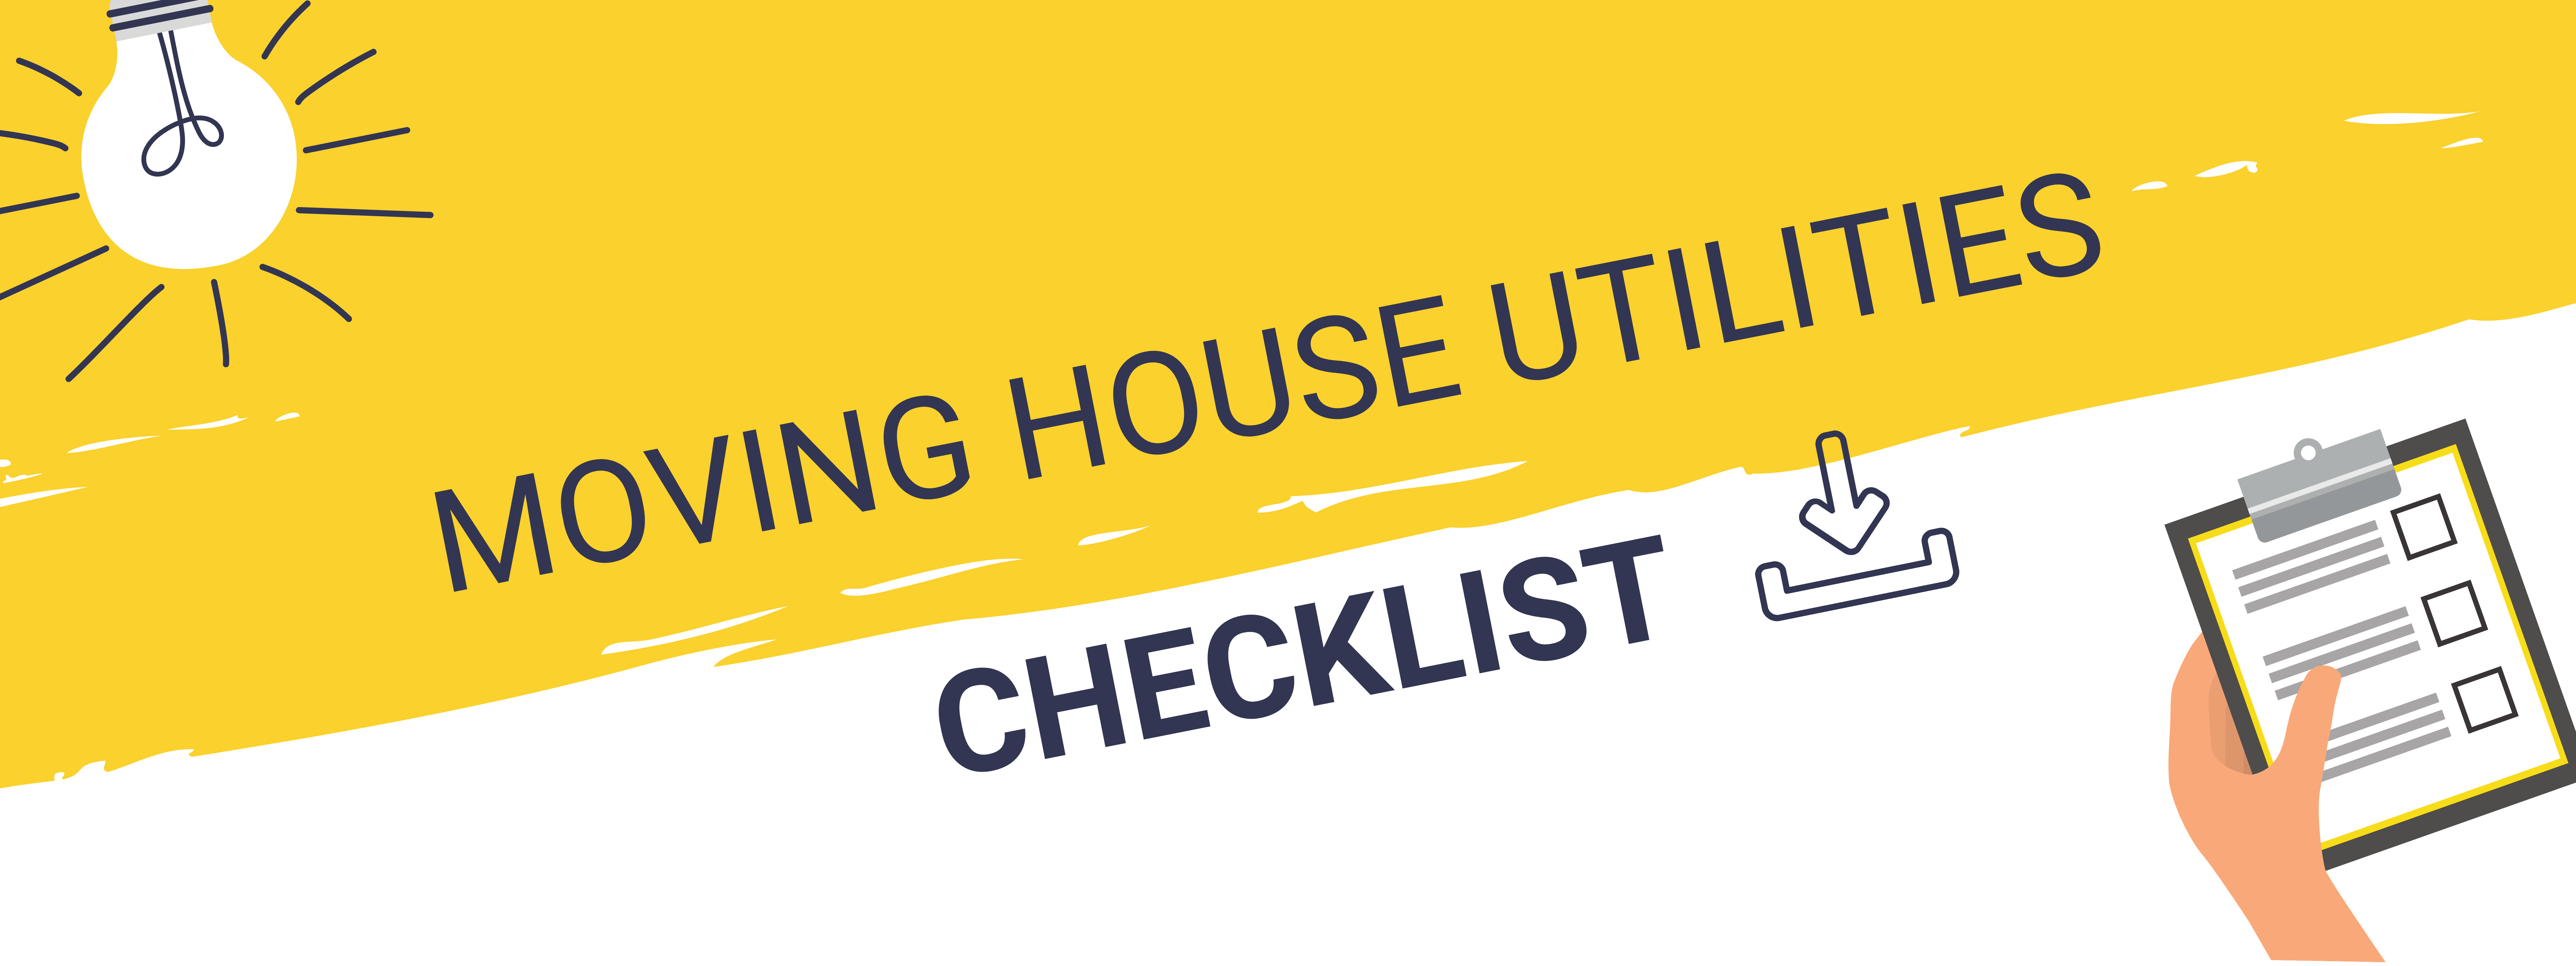 Comprehensive-checklist-moving-house-utilities